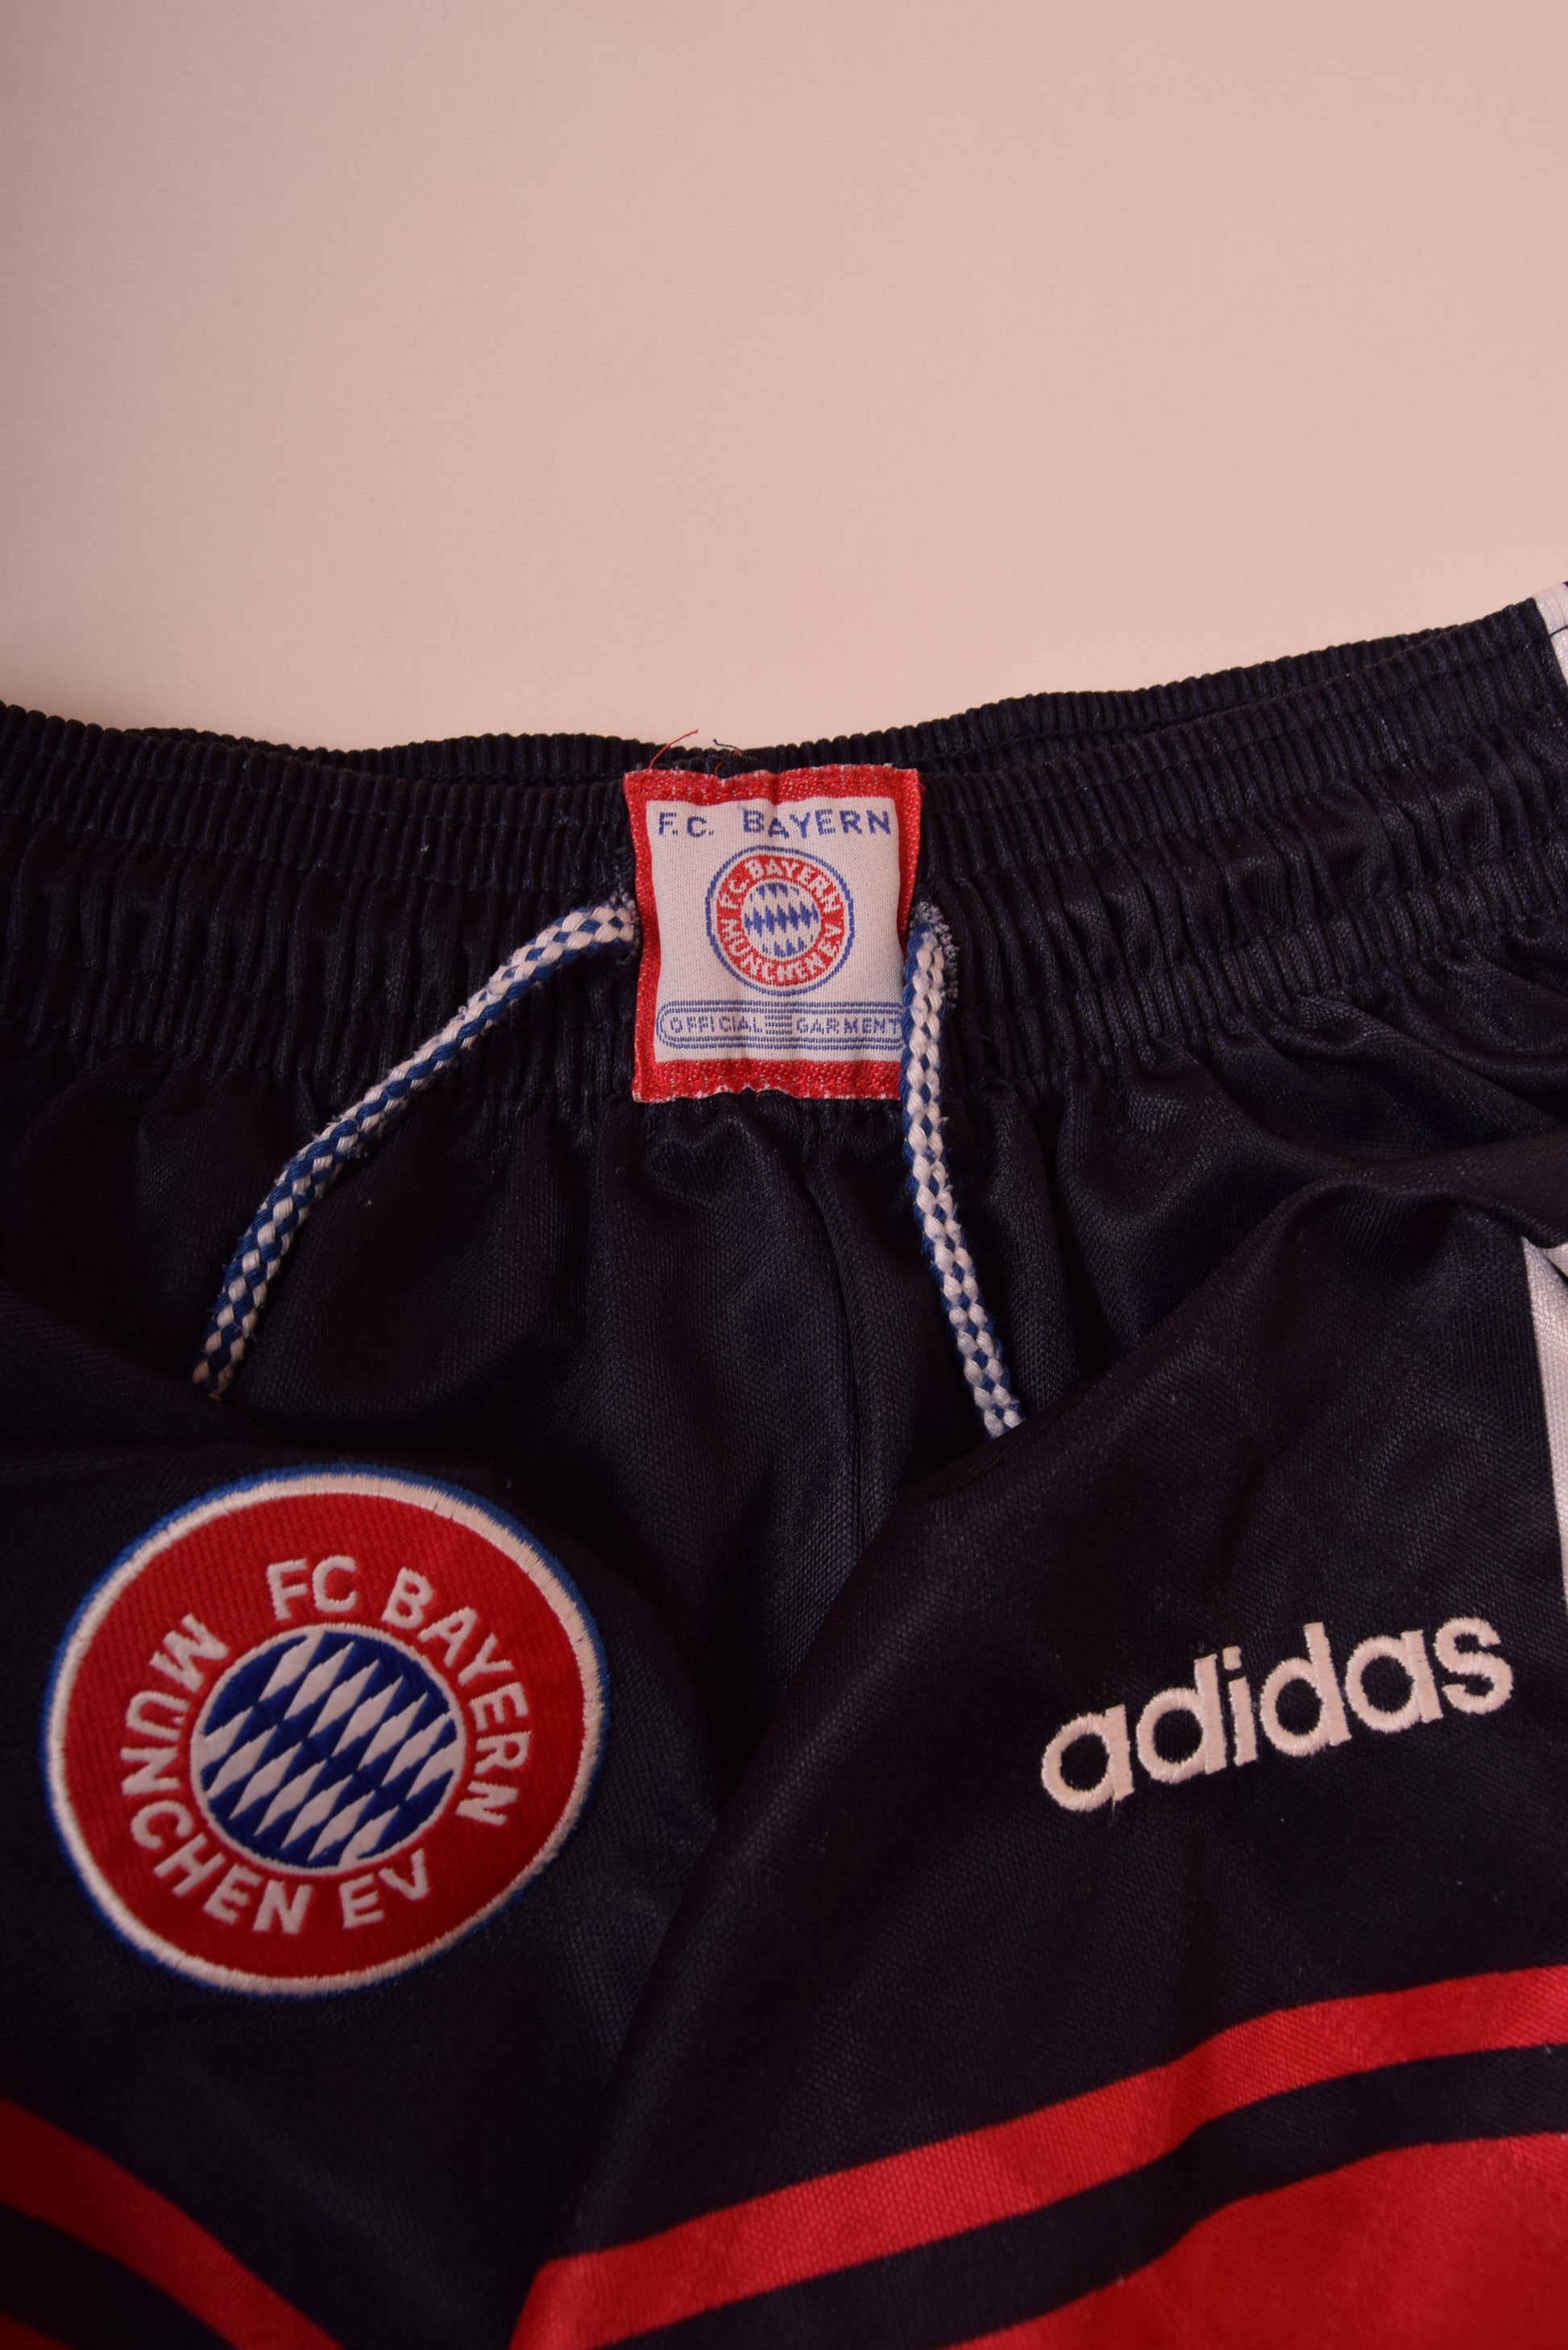 Vintage Bayern Munchen Adidas Football Shorts 1997-1999 Black Red Size M Made in England